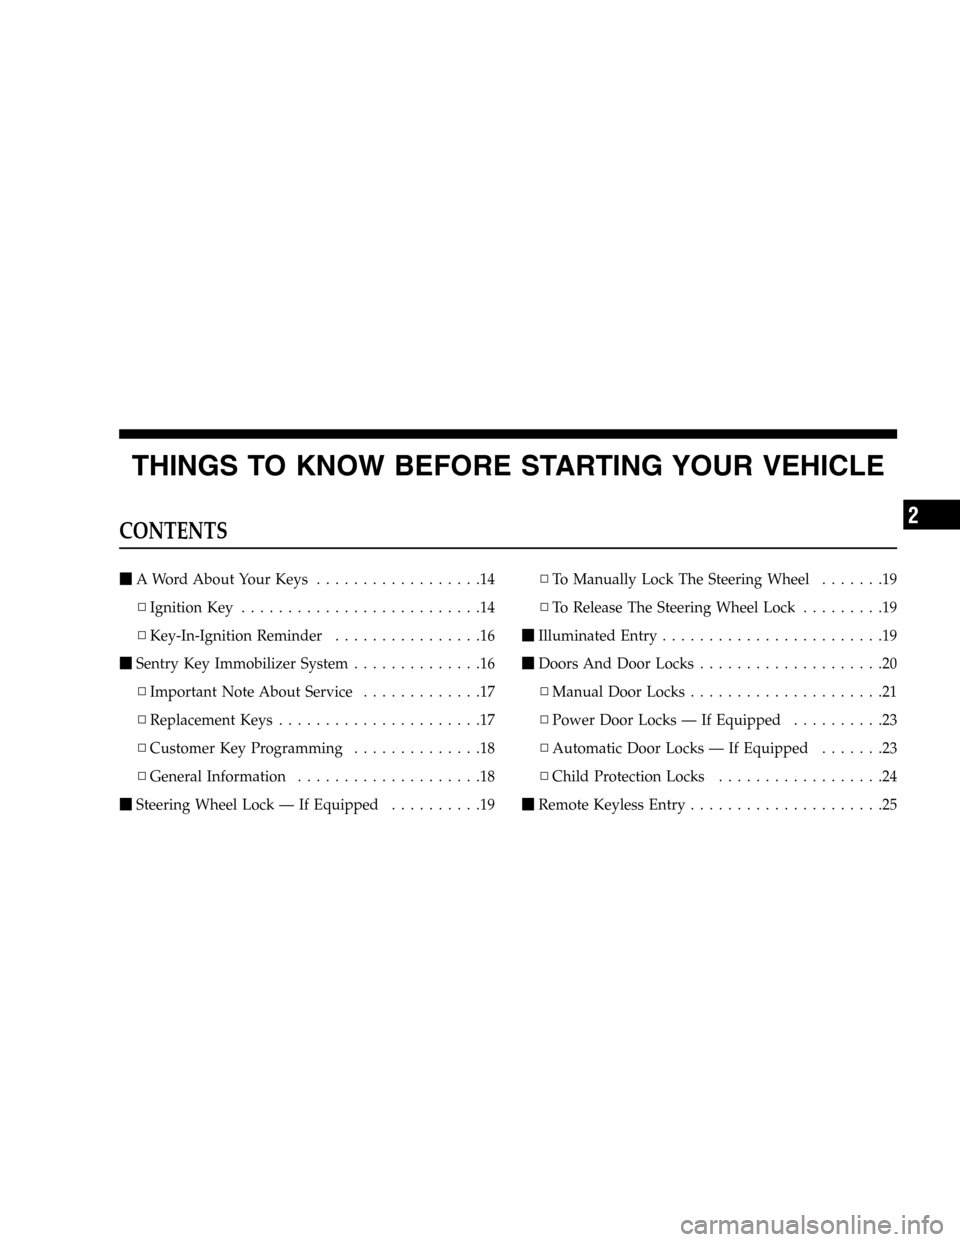 JEEP LIBERTY 2005 KJ / 1.G User Guide THINGS TO KNOW BEFORE STARTING YOUR VEHICLE
CONTENTS
A Word About Your Keys..................14
▫Ignition Key..........................14
▫Key-In-Ignition Reminder................16
Sentry Key I